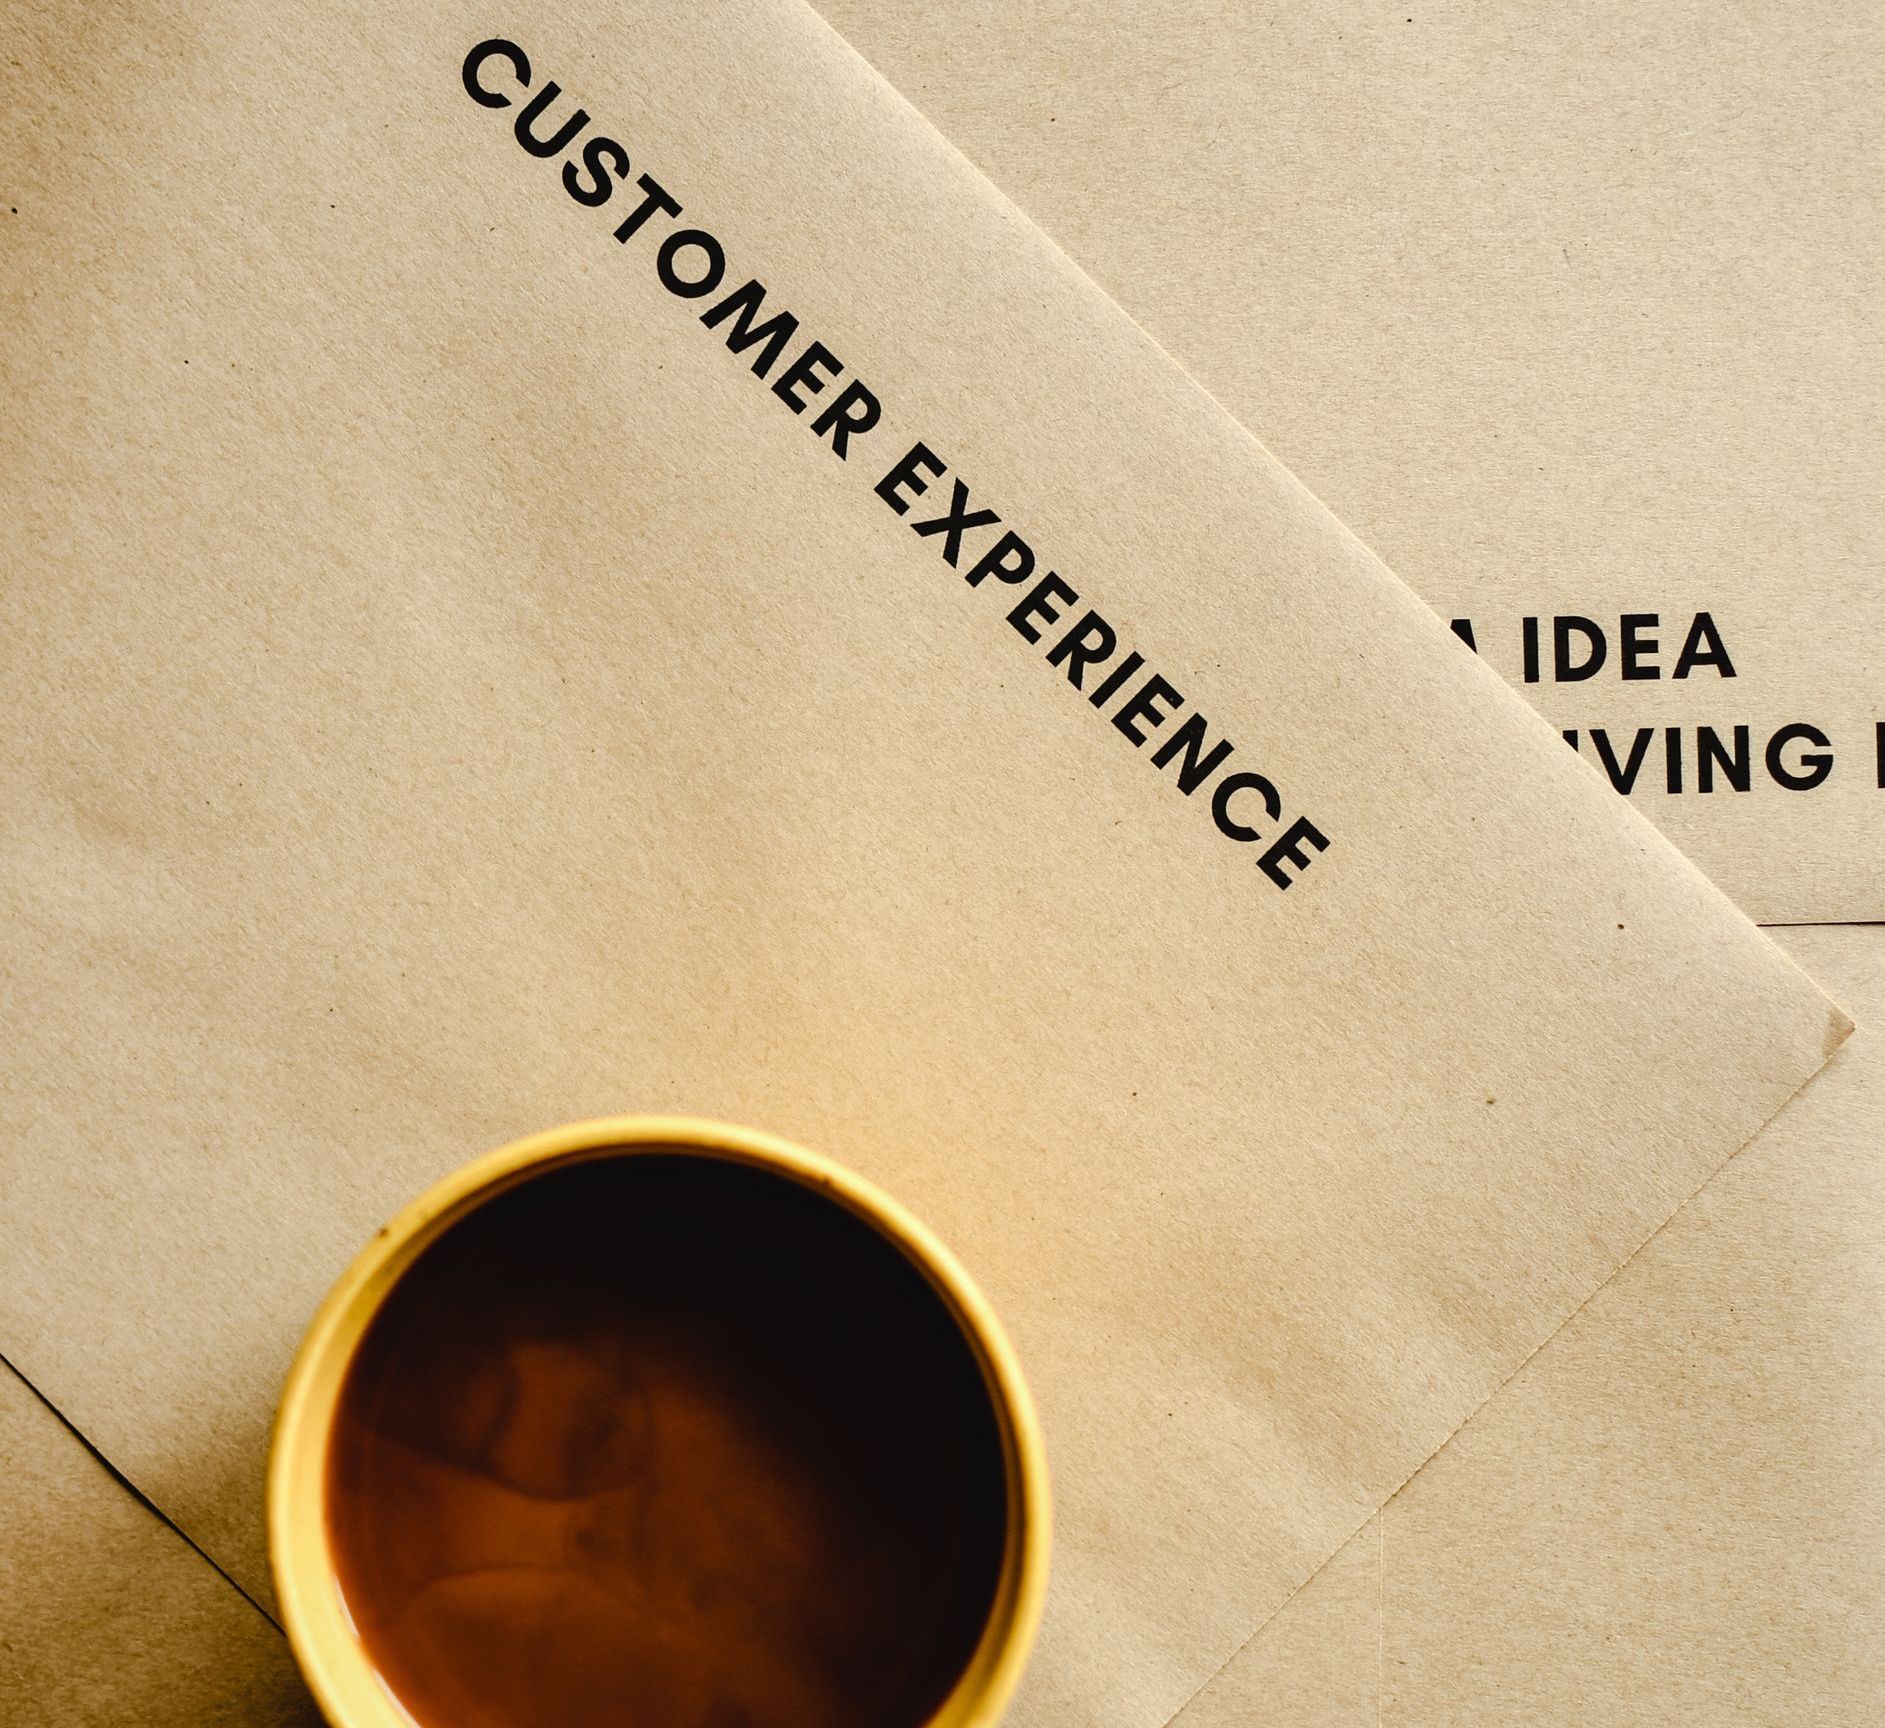 Customer experience printed on paper with coffee cup